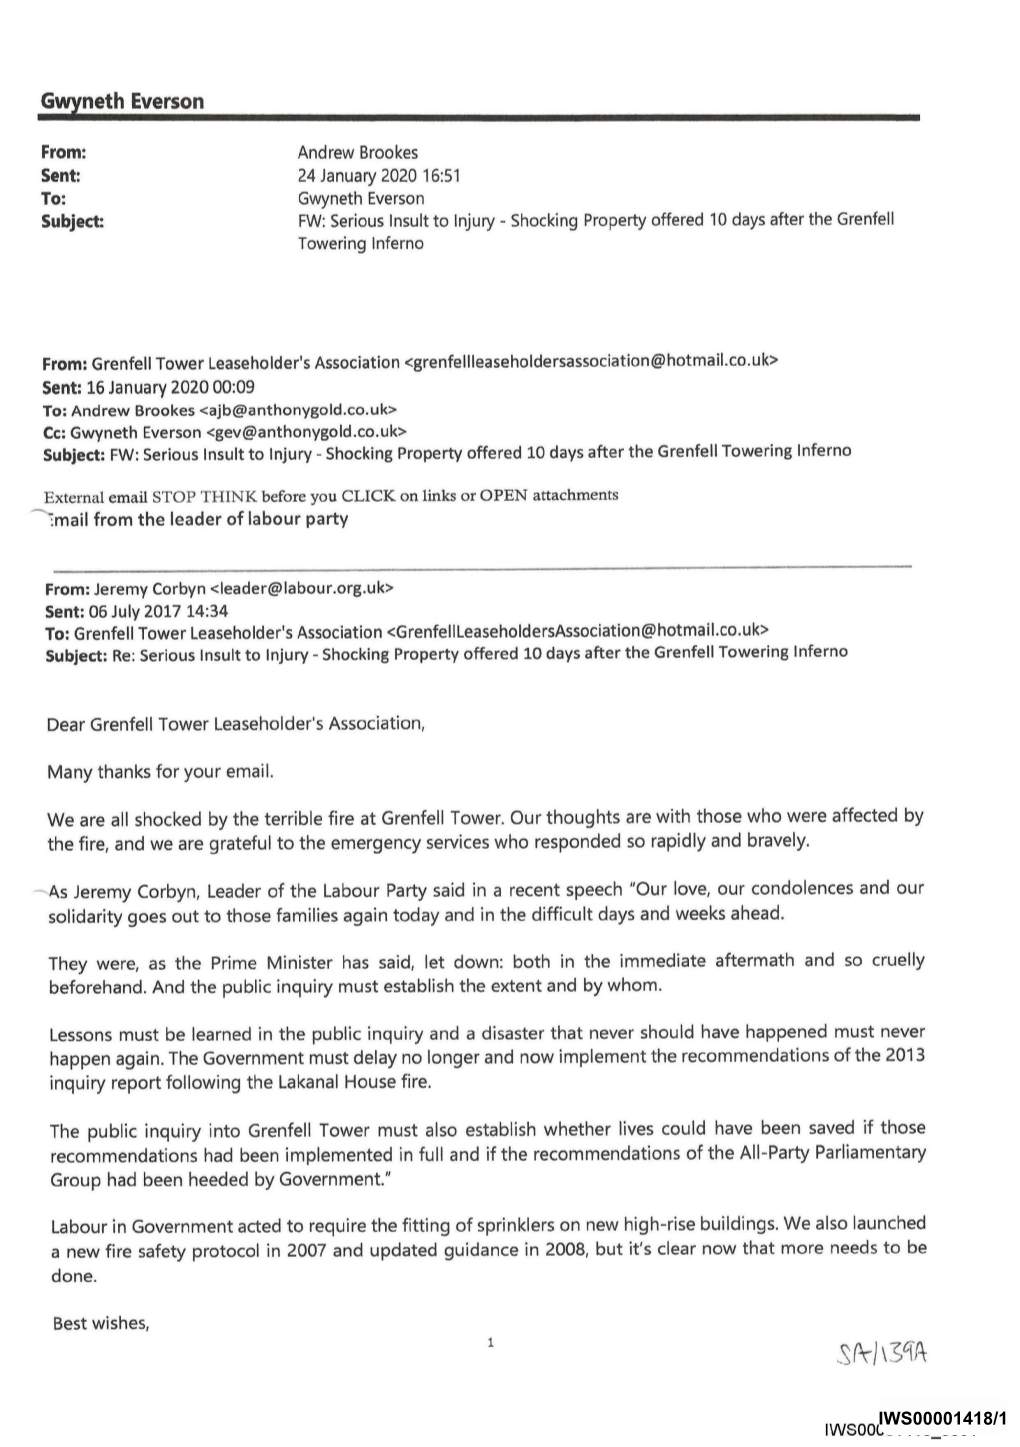 Email Chain Dated 6 July 2017 Between Jeremy Corbyn & Shahid